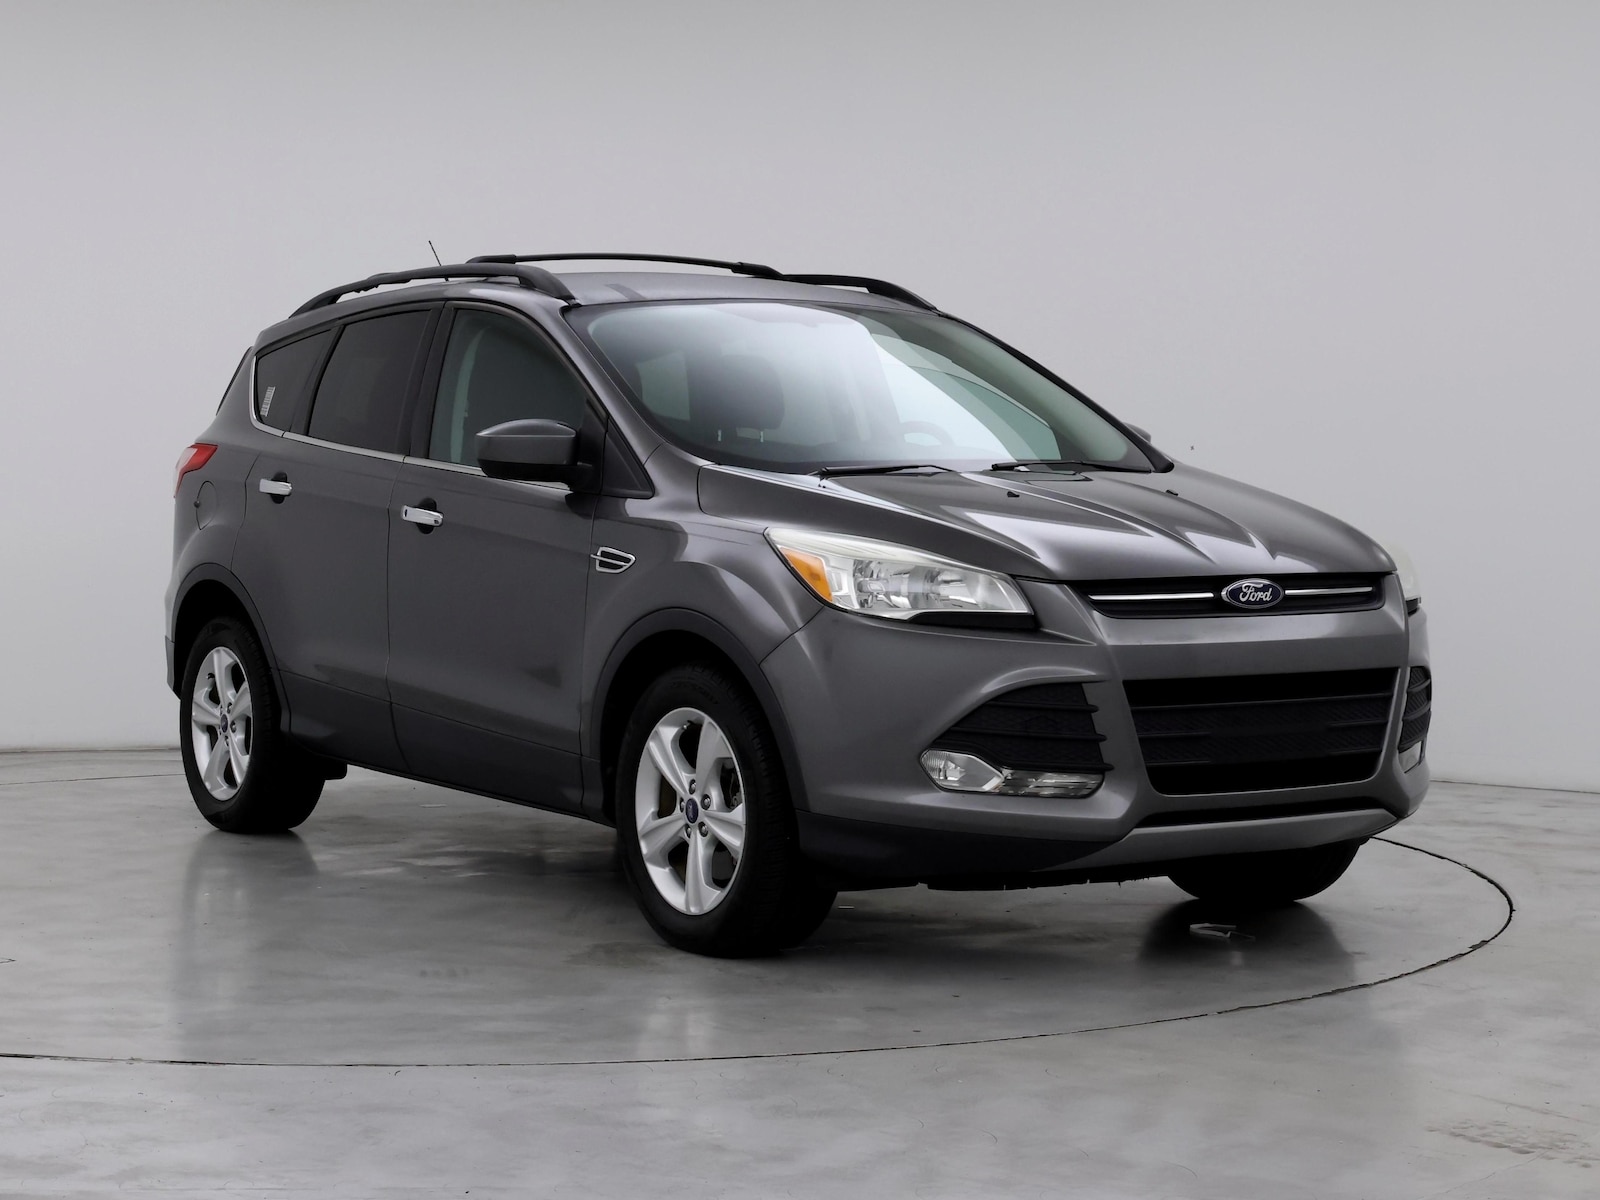 Used 2014 Ford Escape SE with VIN 1FMCU0G93EUA21863 for sale in Kenosha, WI